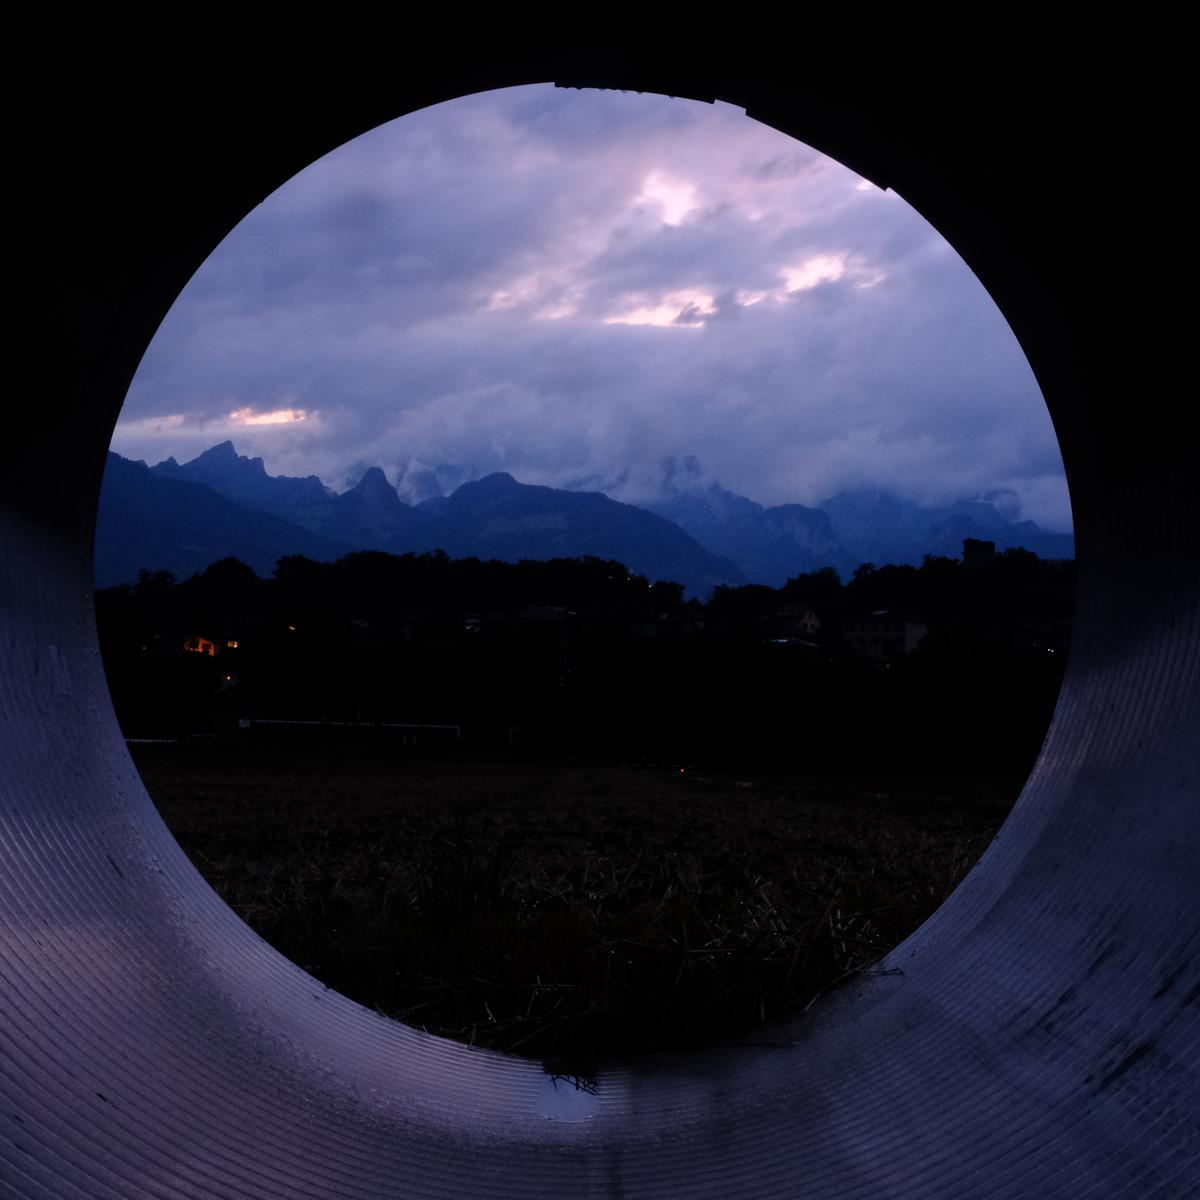 The morning view from inside a pipe I slept during heavy rain in Switzerland